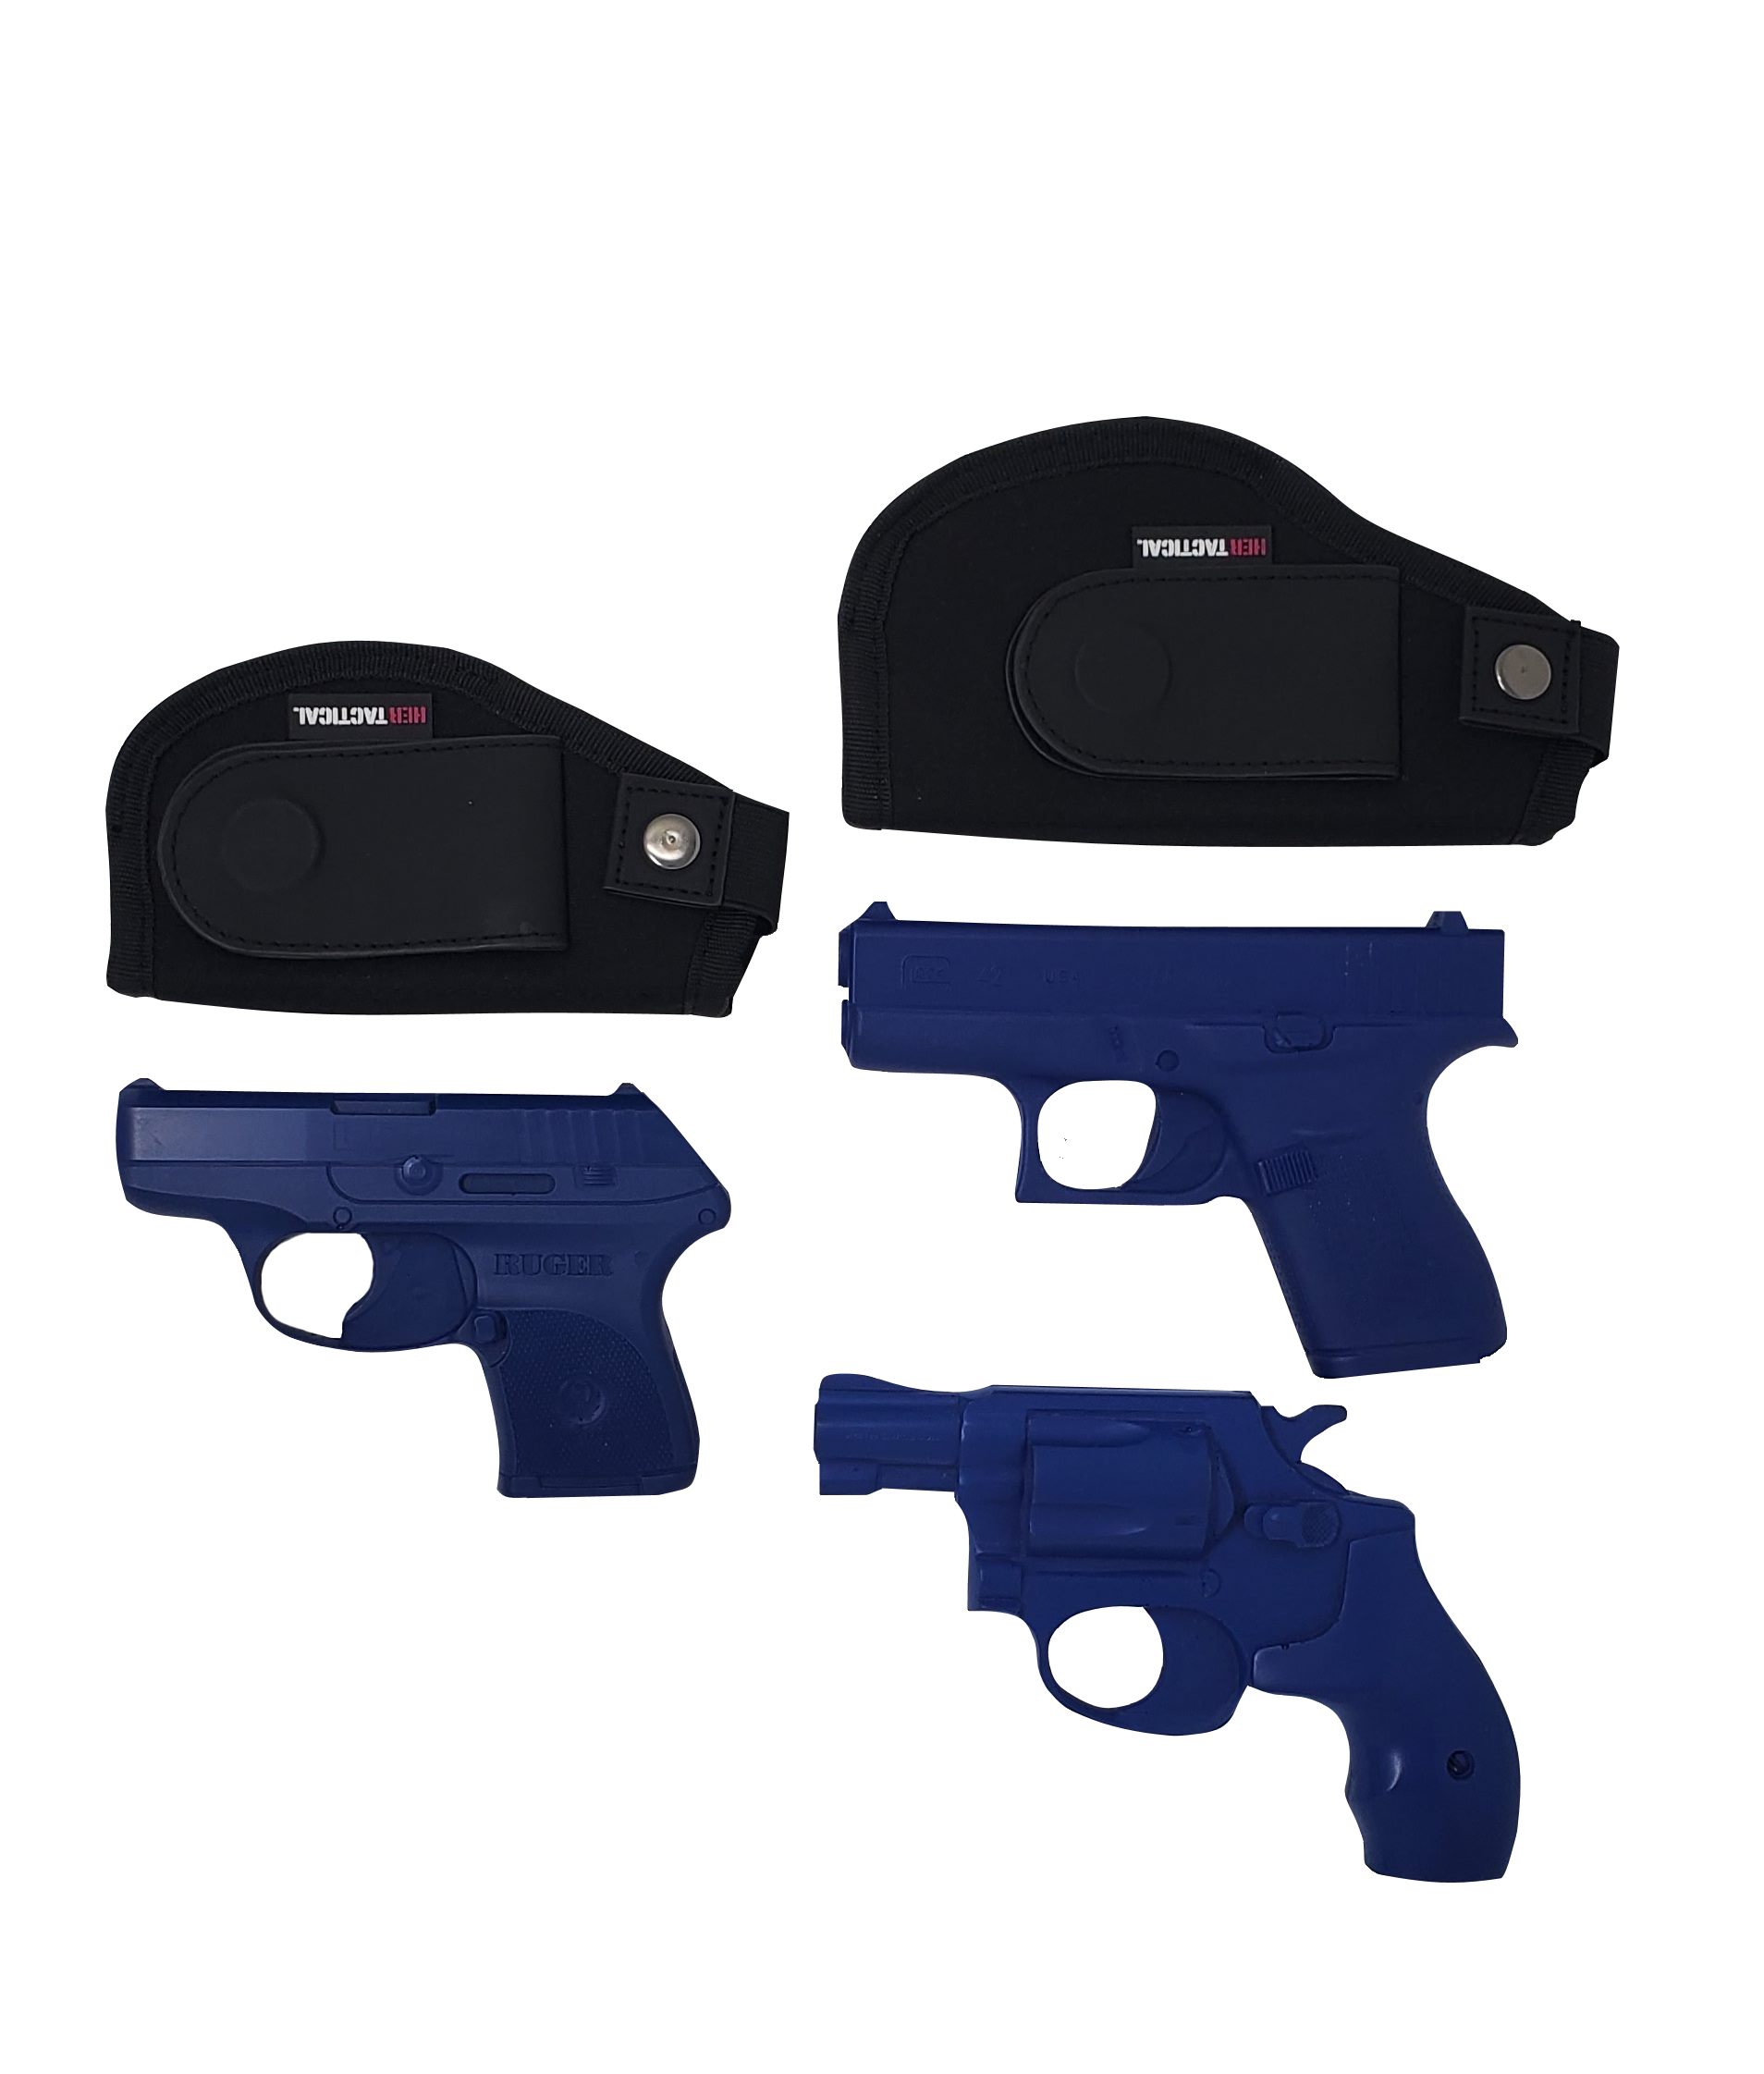 Absolutely The Strongest Magnet Holsters In The Market!See Descriptions+Deals!!! 